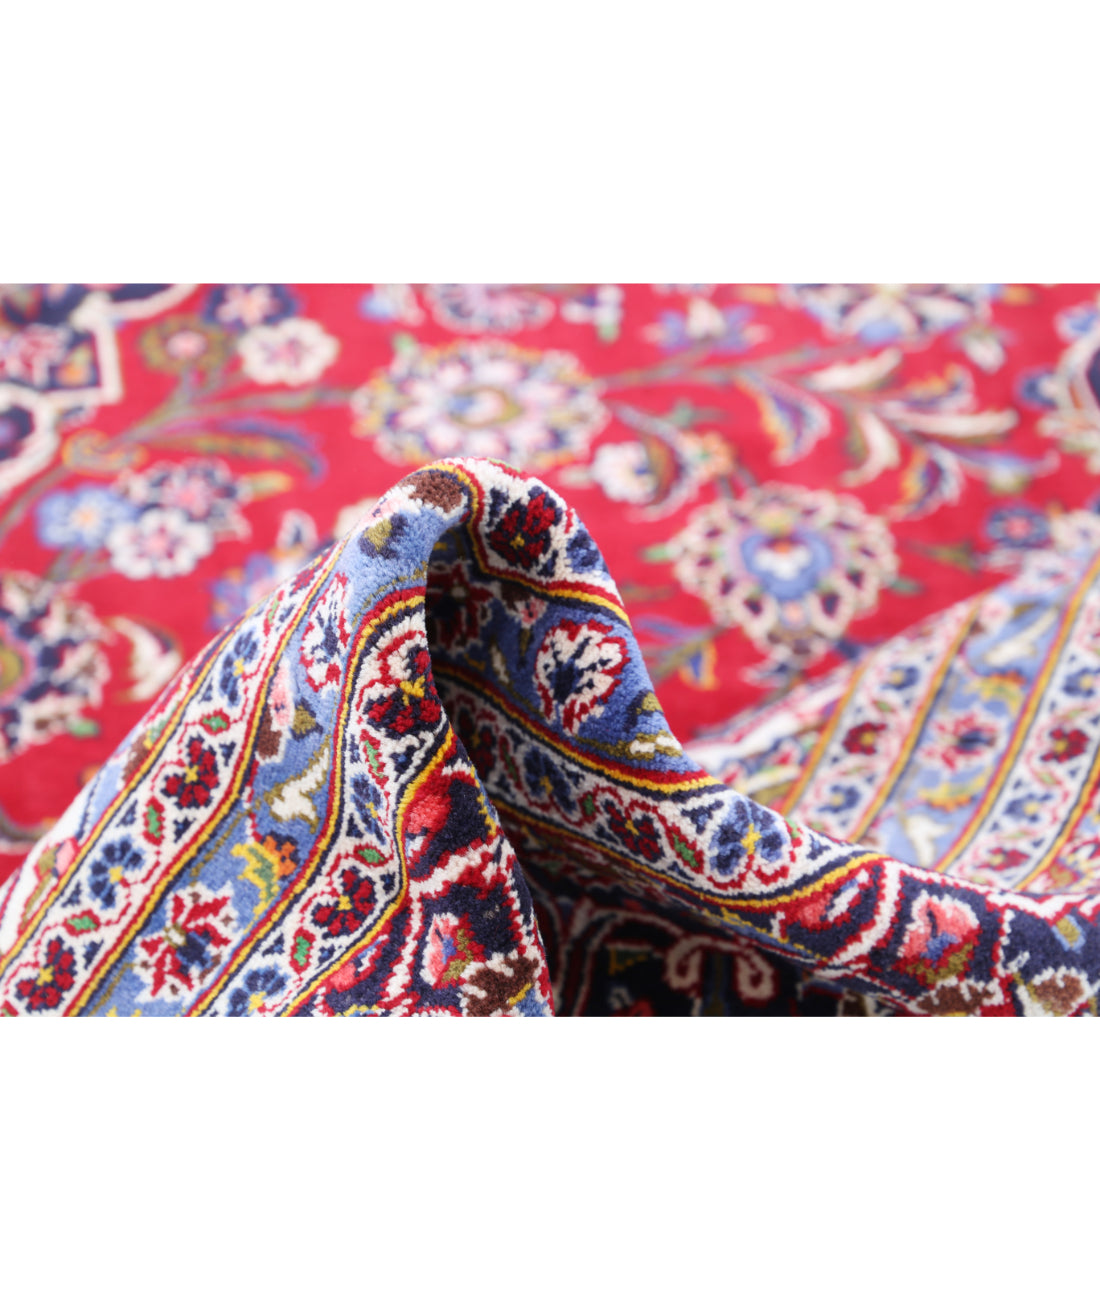 Hand Knotted Persian Kashan Wool Rug - 9'6'' x 13'6'' 9'6'' x 13'6'' (285 X 405) / Red / Blue